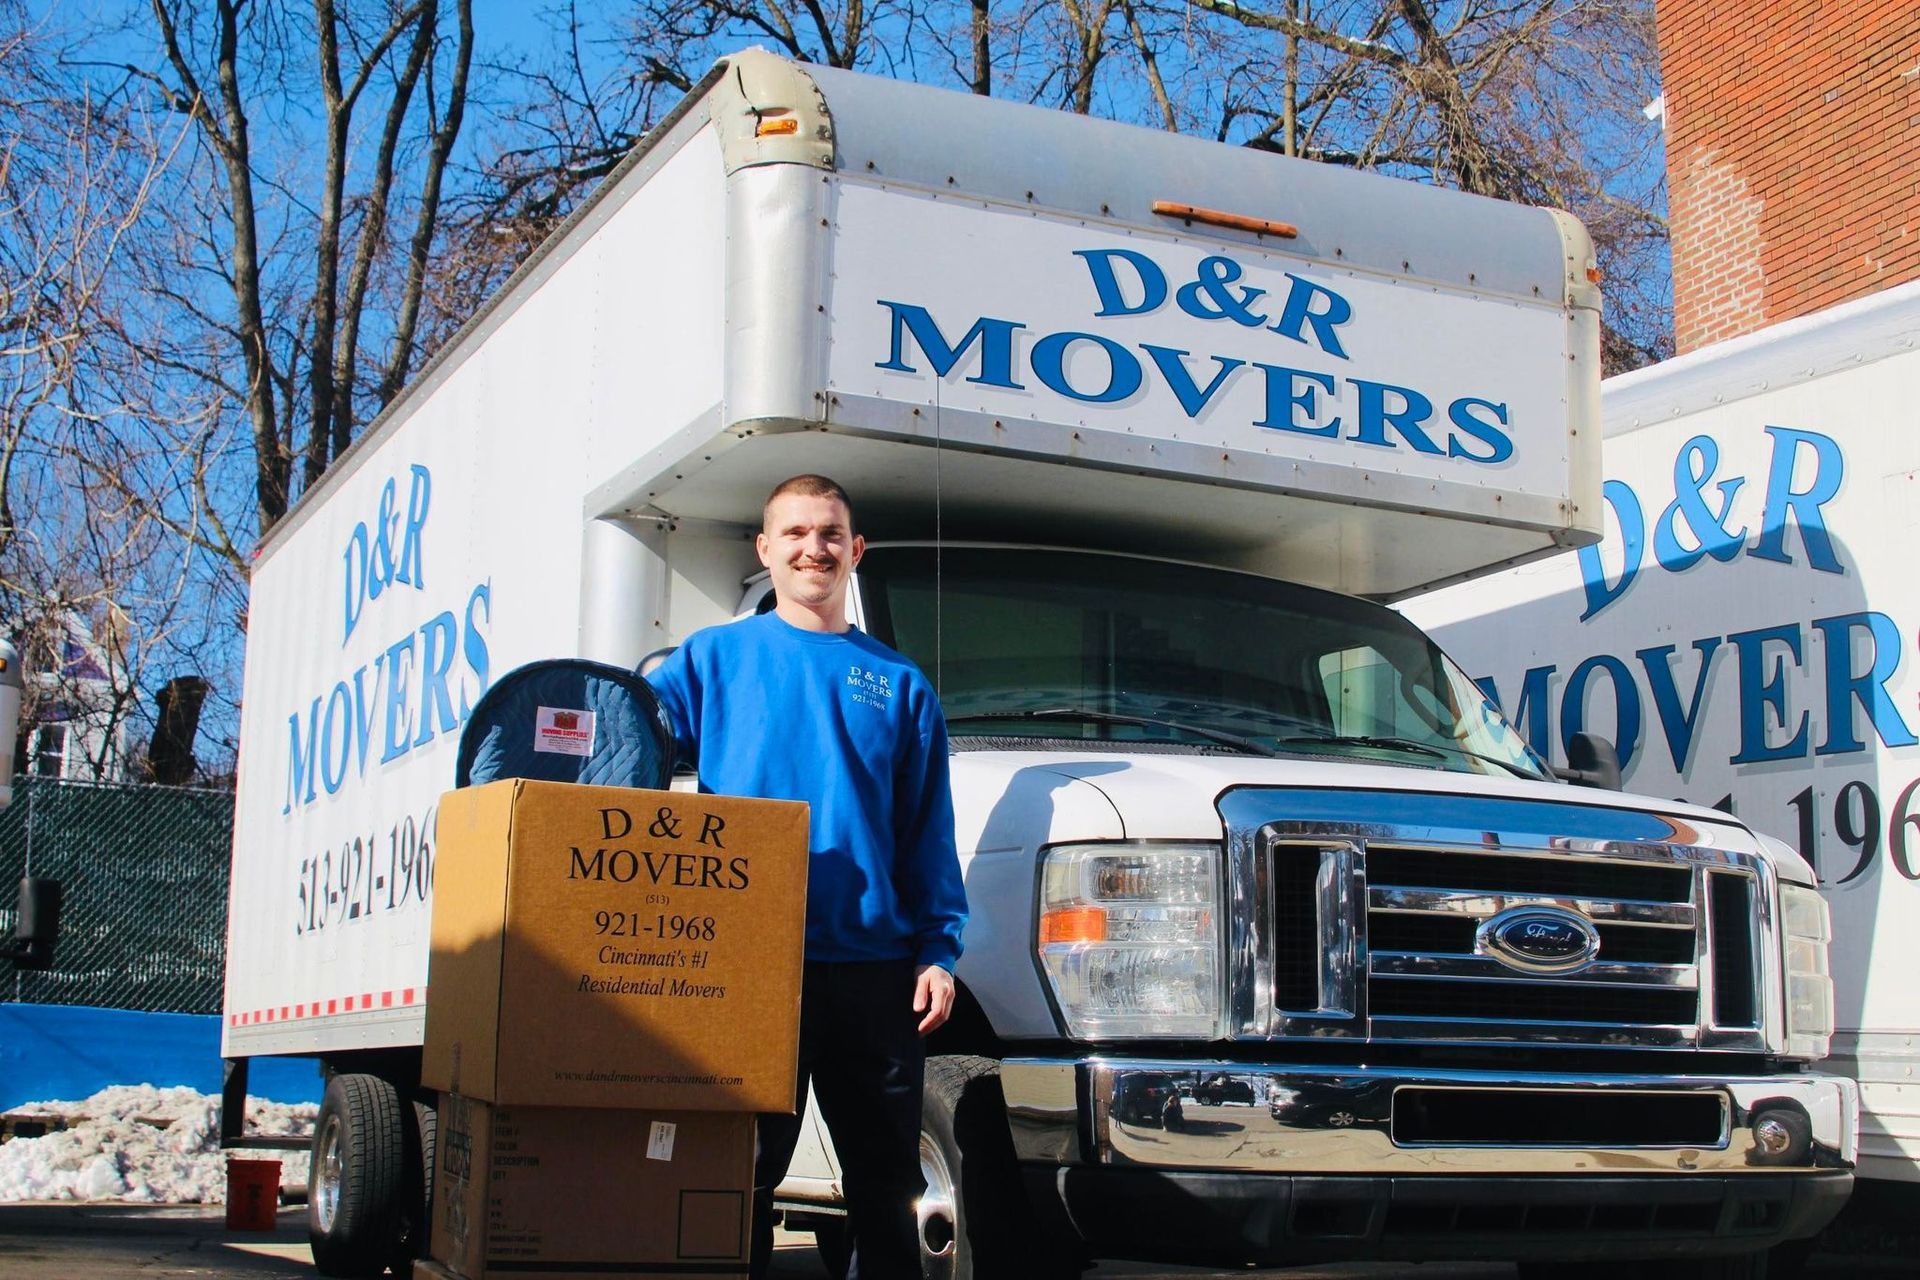 3 Moving Tips to Downsize Your Home